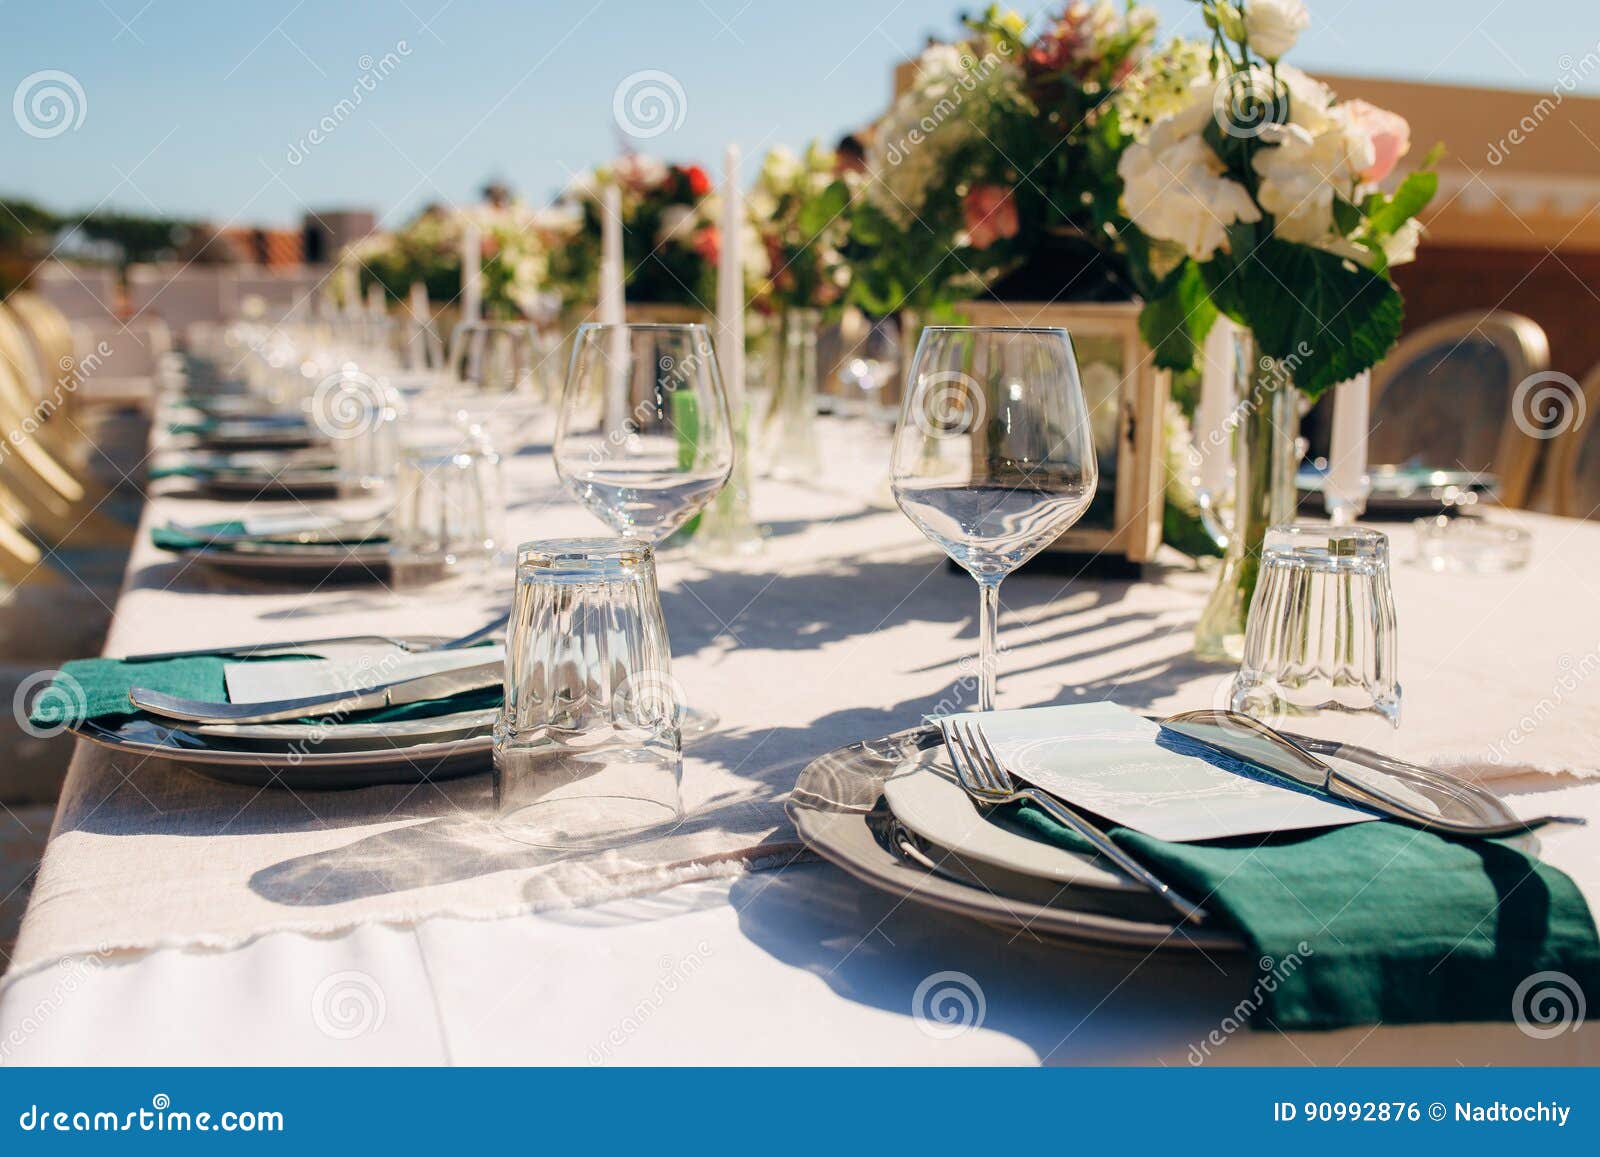 table setting at a wedding banquet. decoration flowers